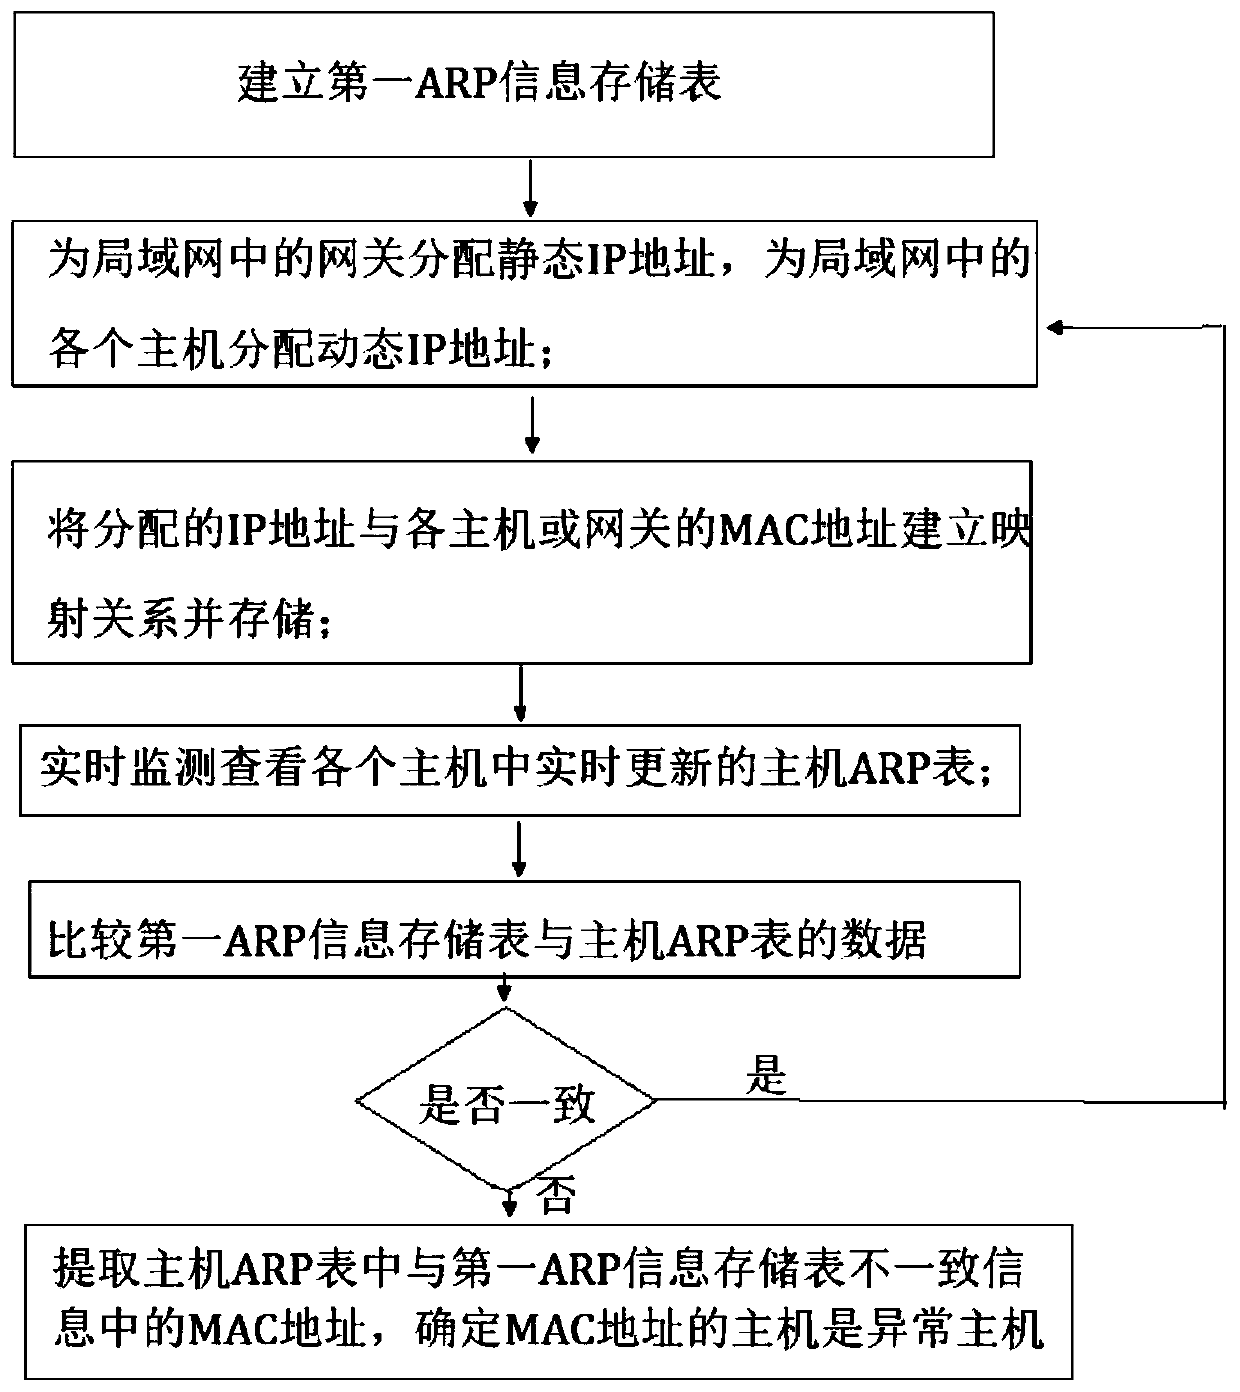 System for effectively monitoring and preventing ARP viruses